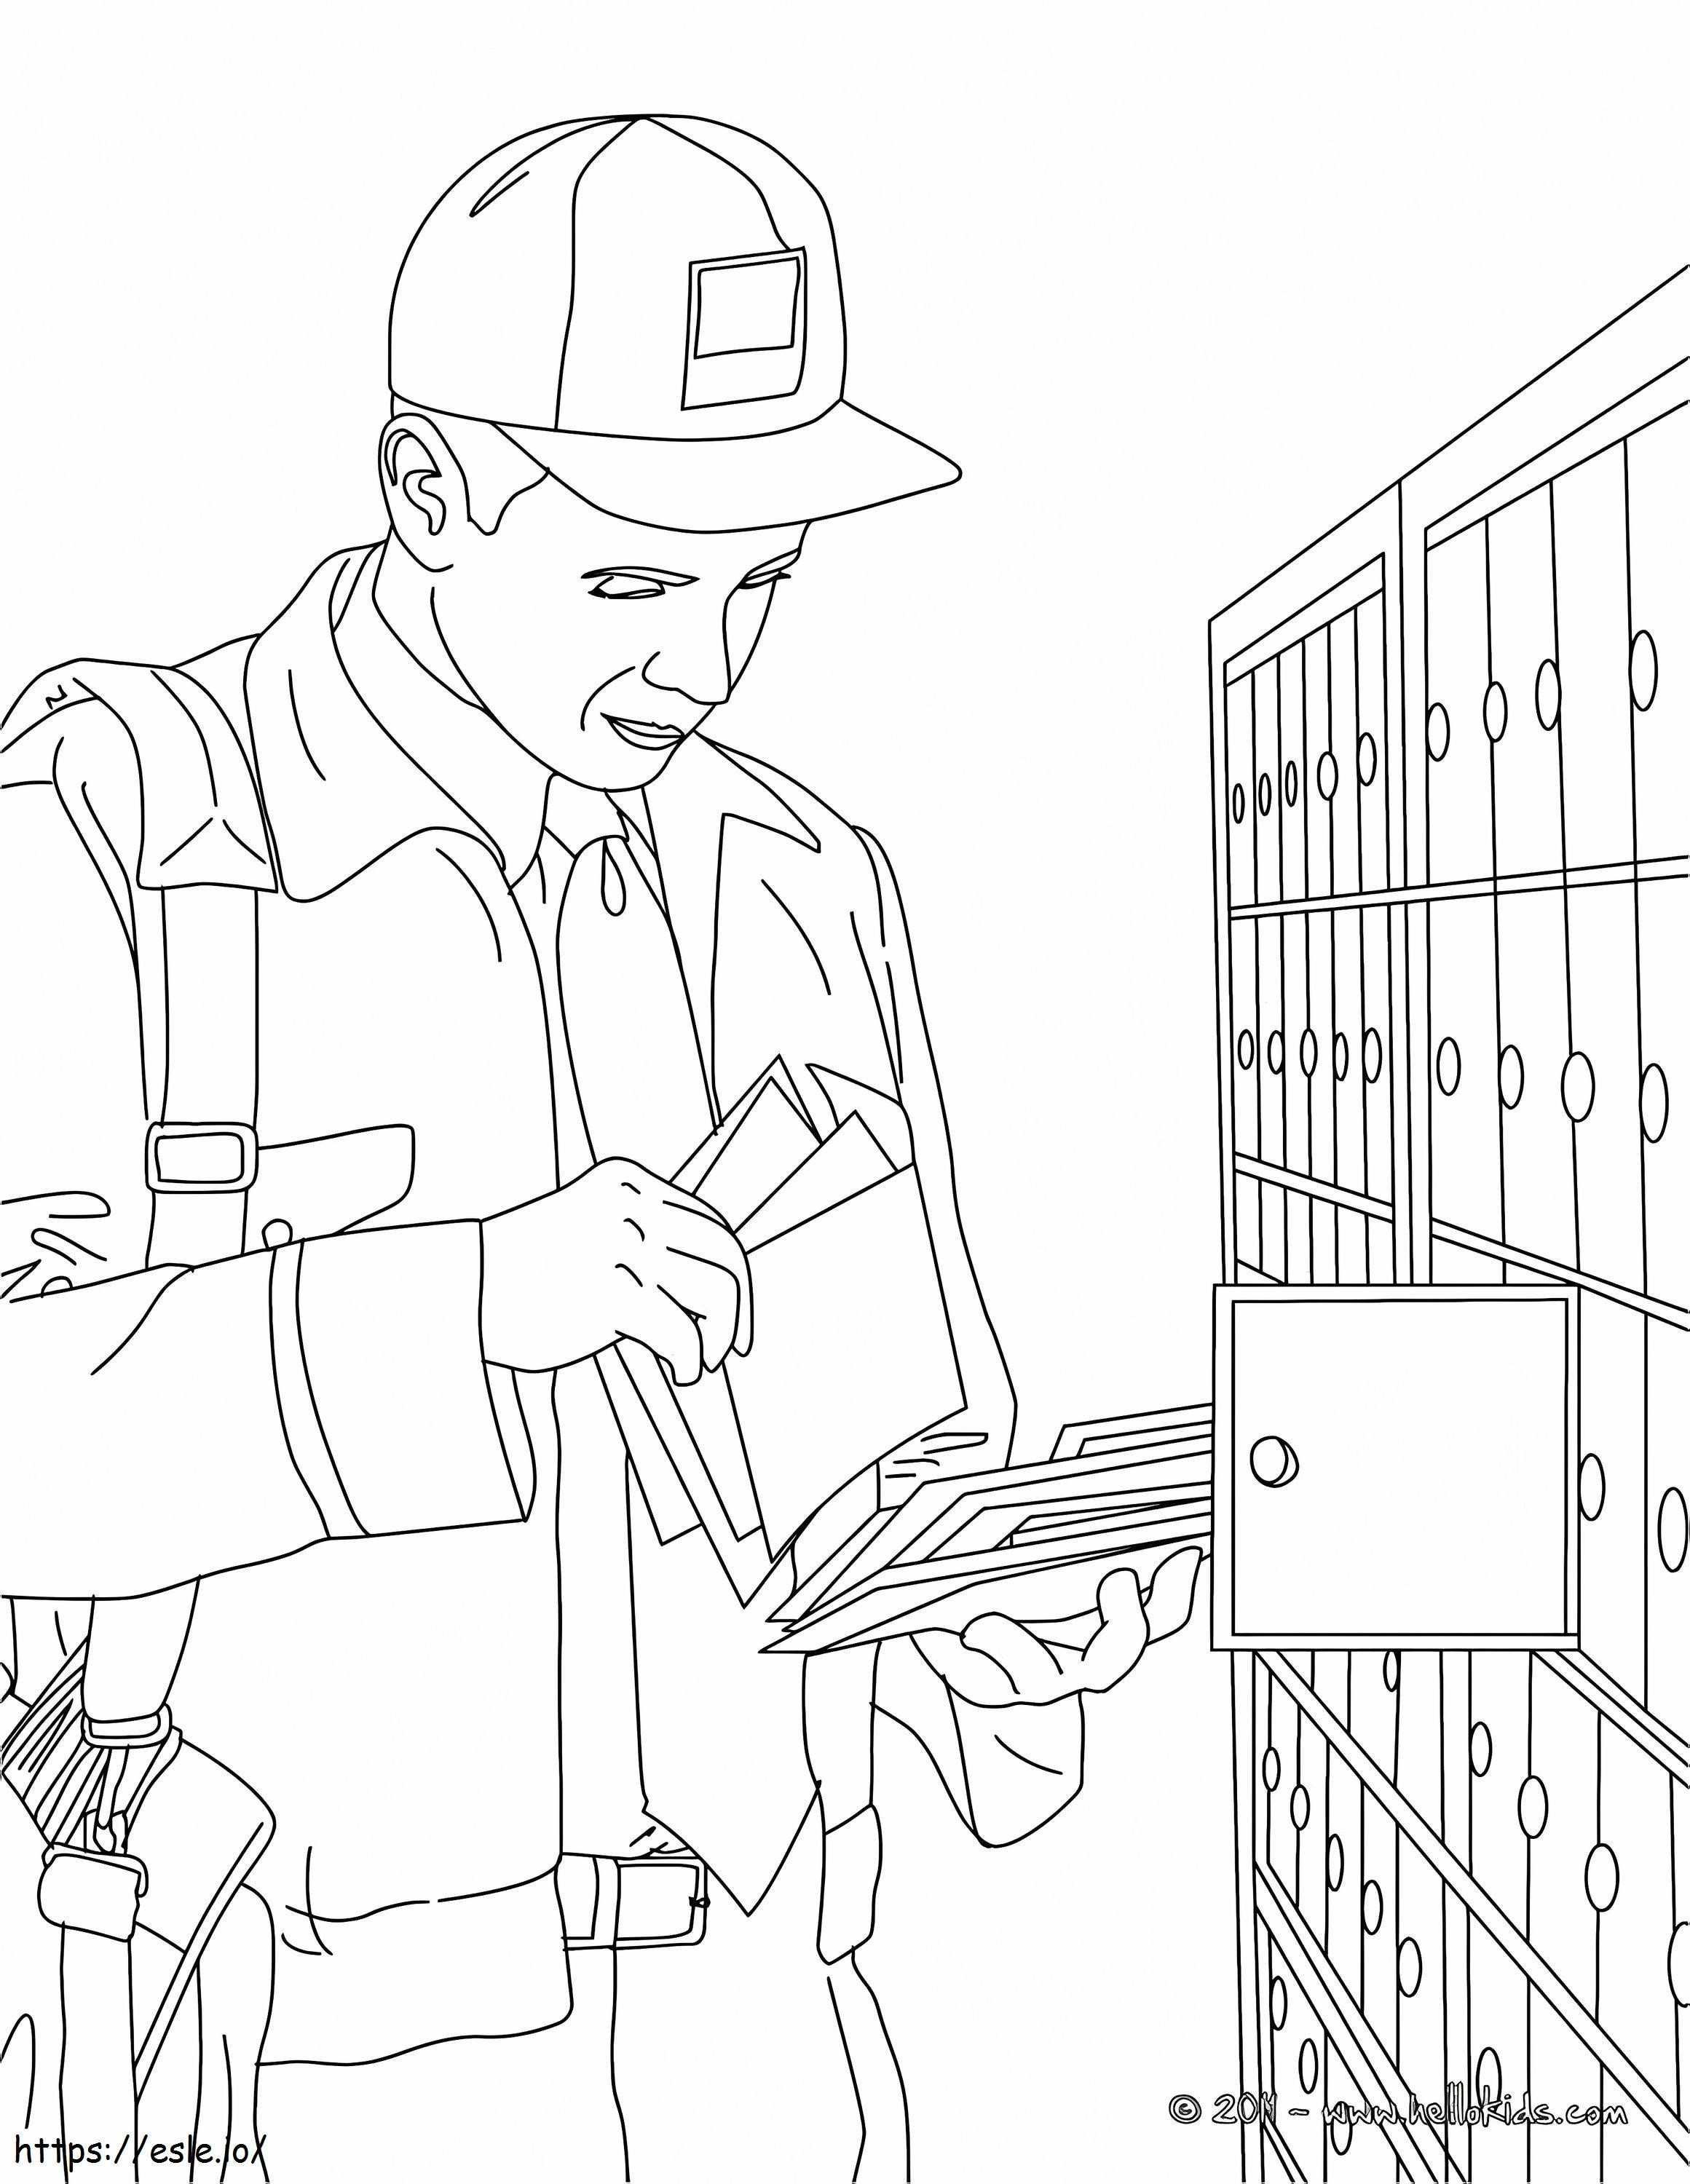 Post Office Man coloring page